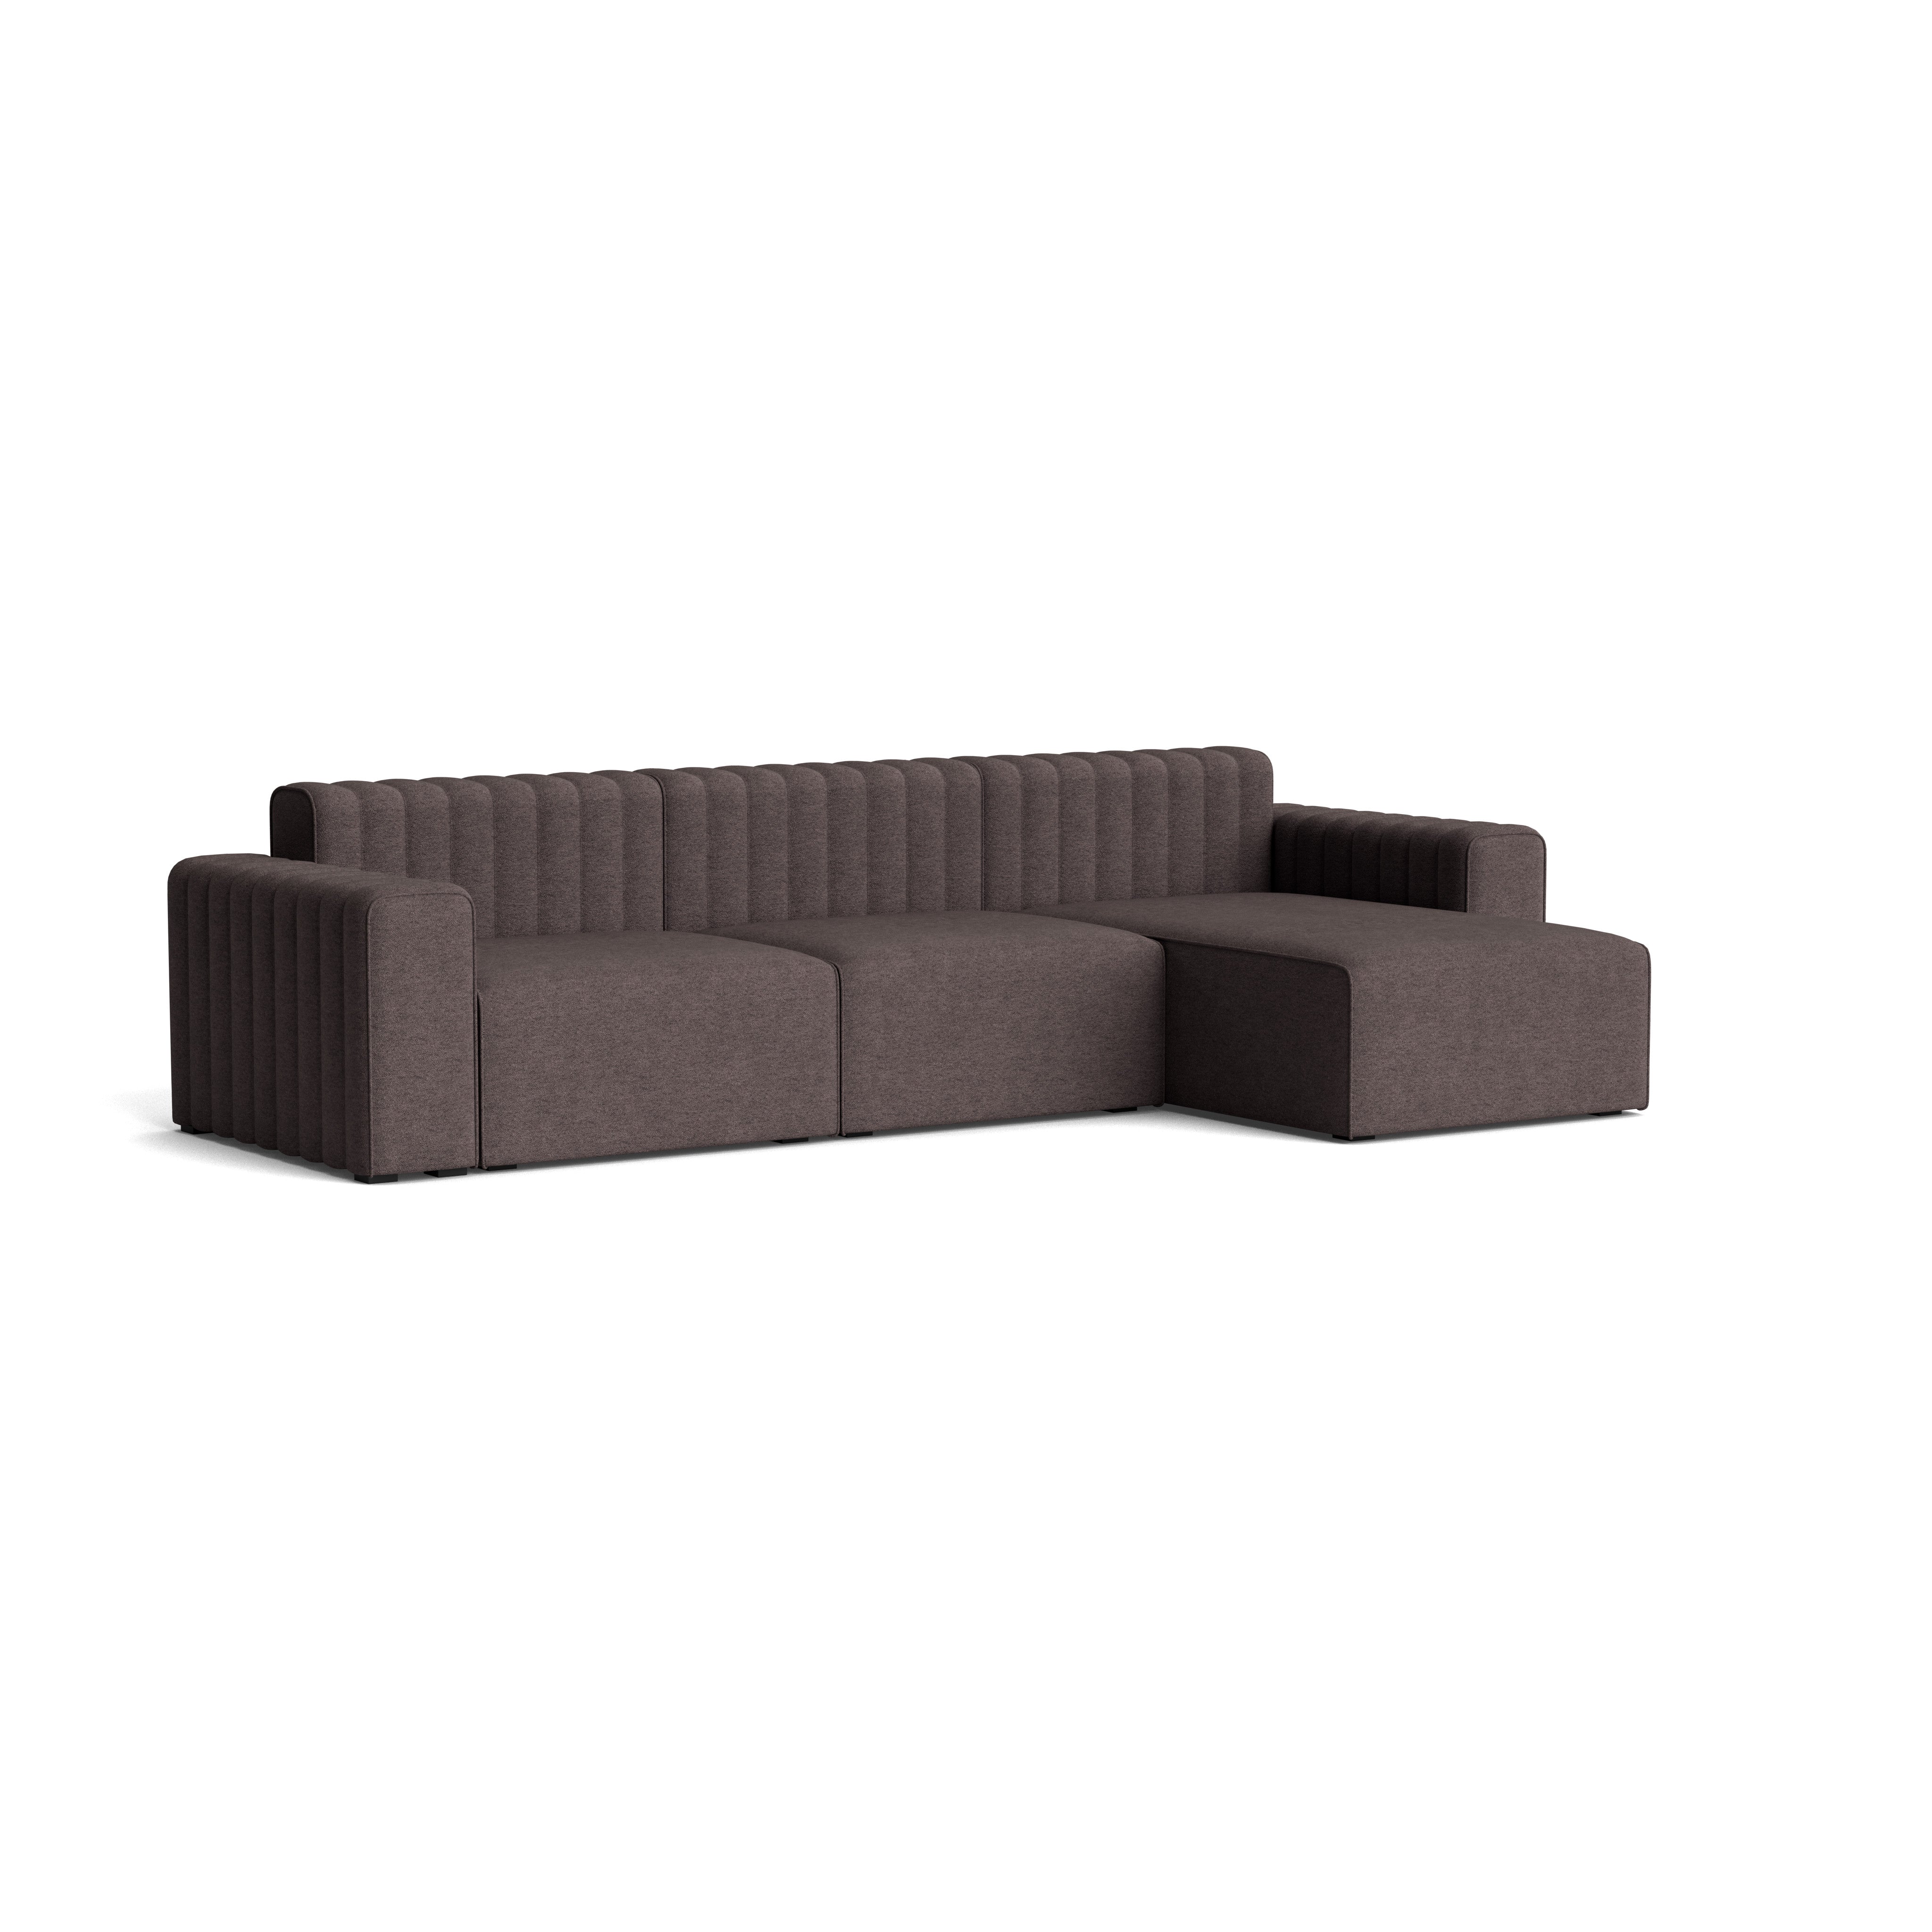 RIFF Sofa, Three Seater with Chaise Lounge Left (Chaise Longue Left, Center, Right Arm)